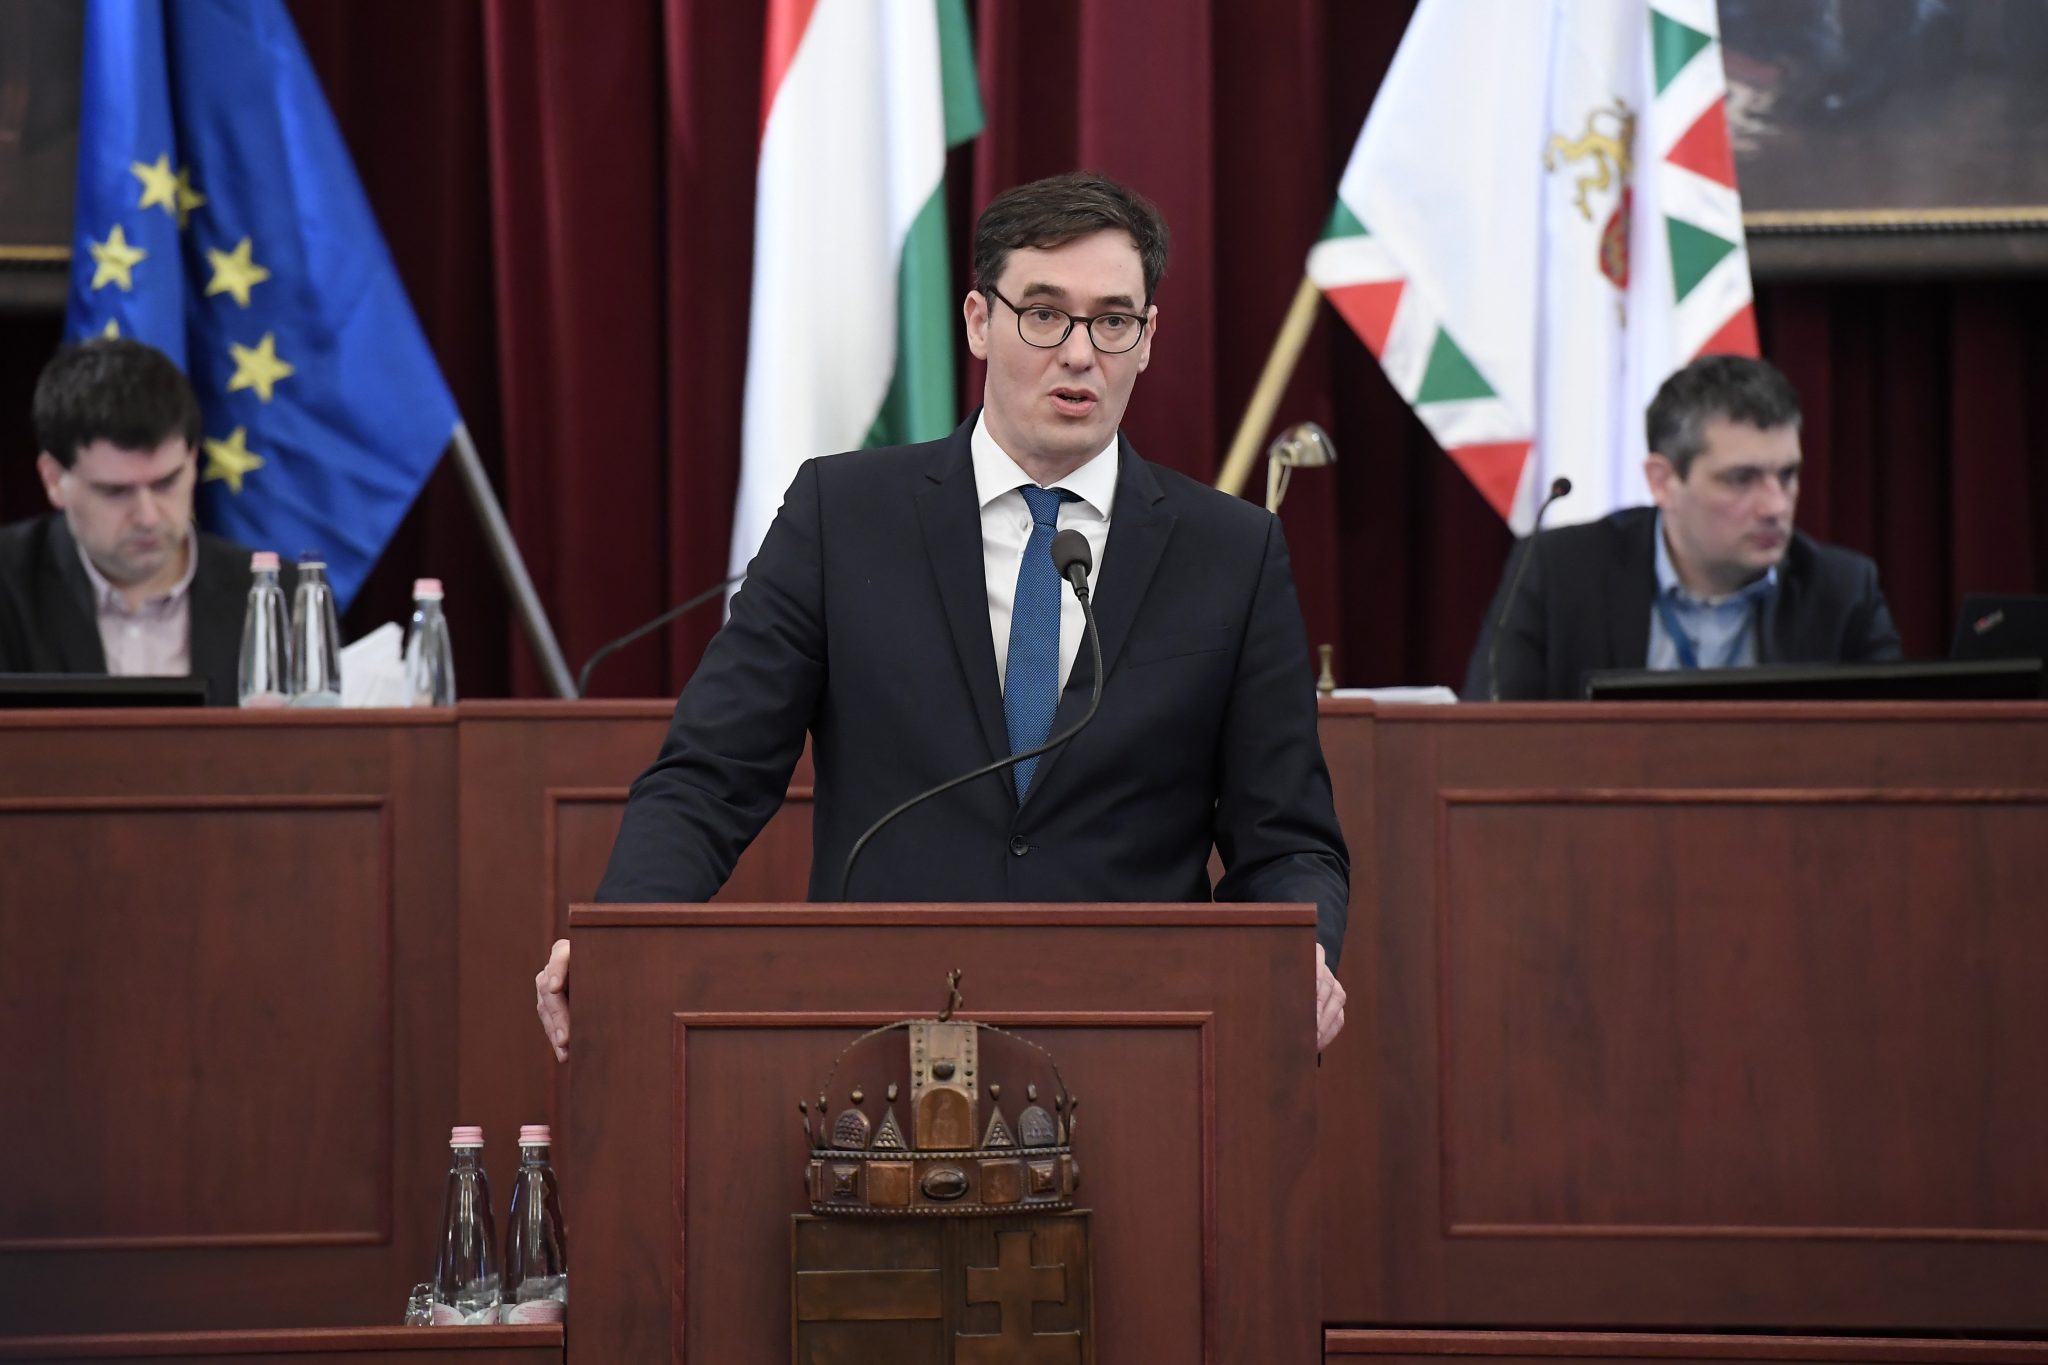 Karácsony: Gov't Aims to 'Shackle' Local Governments to Cover Up Its Failures